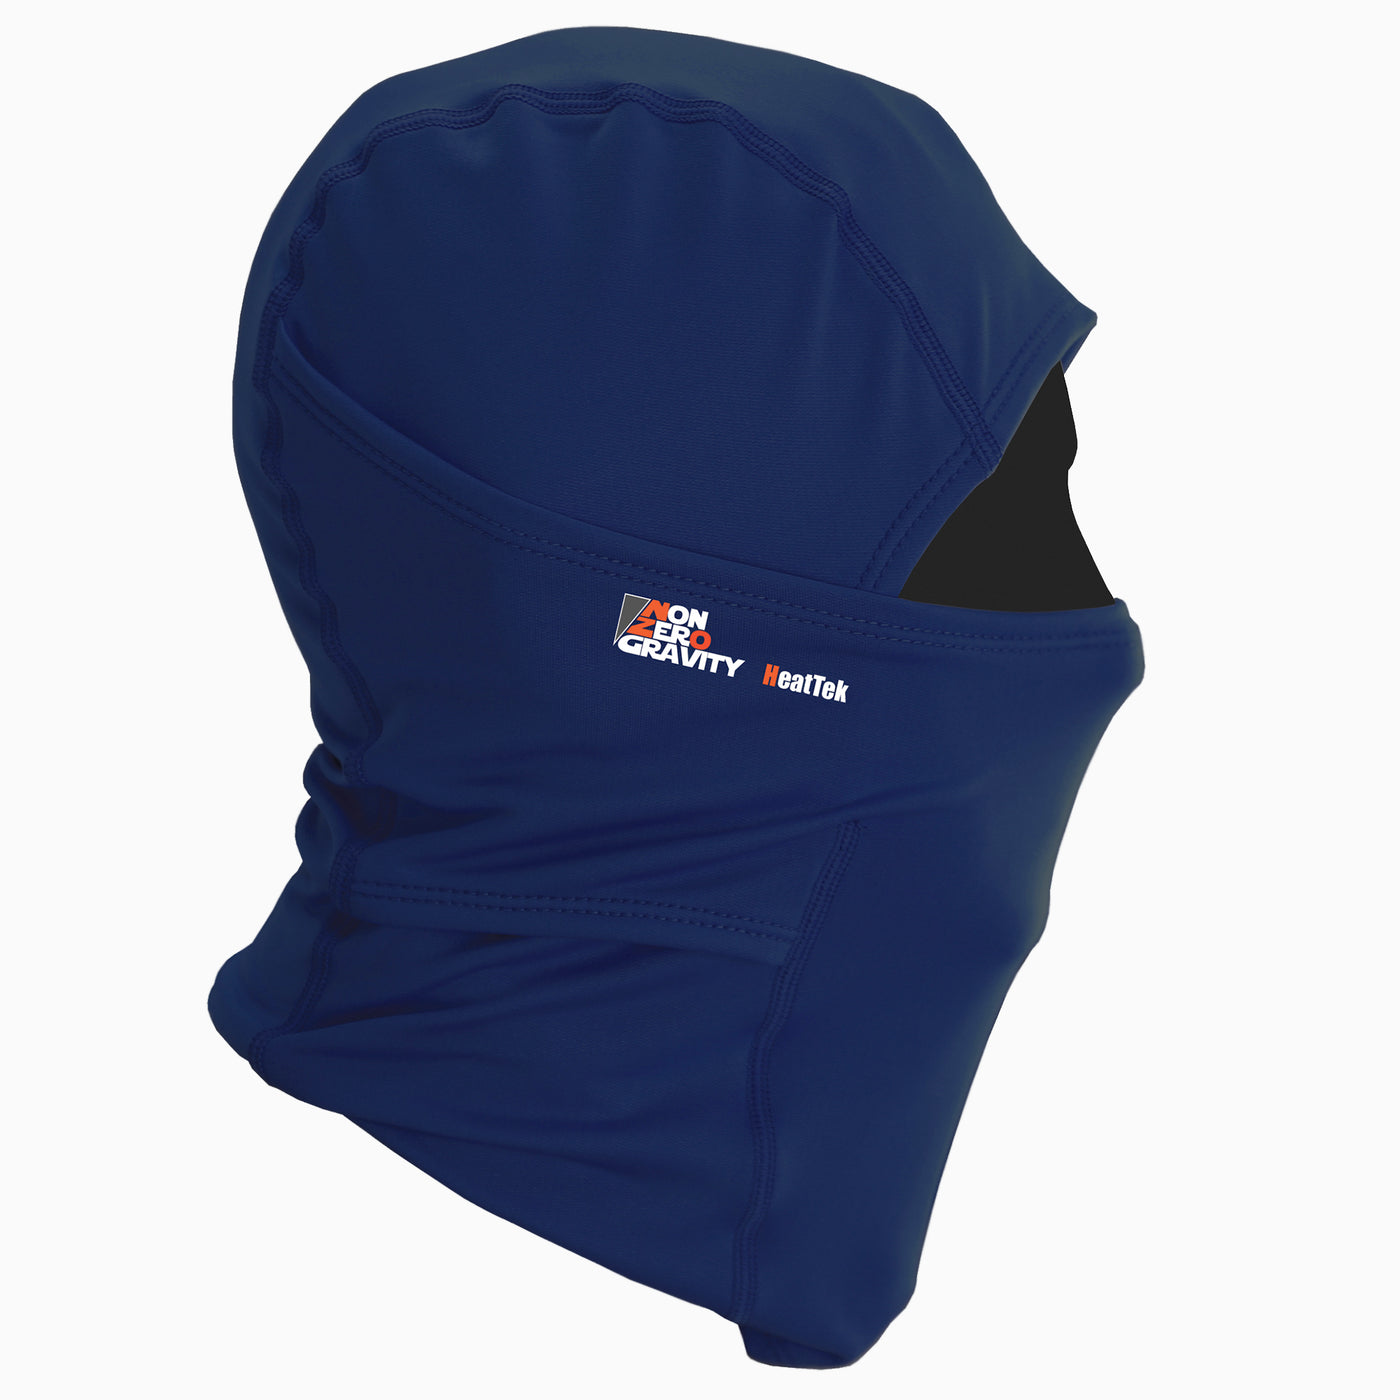 a dark blue spandex athletic balaclava to mask and protect your face